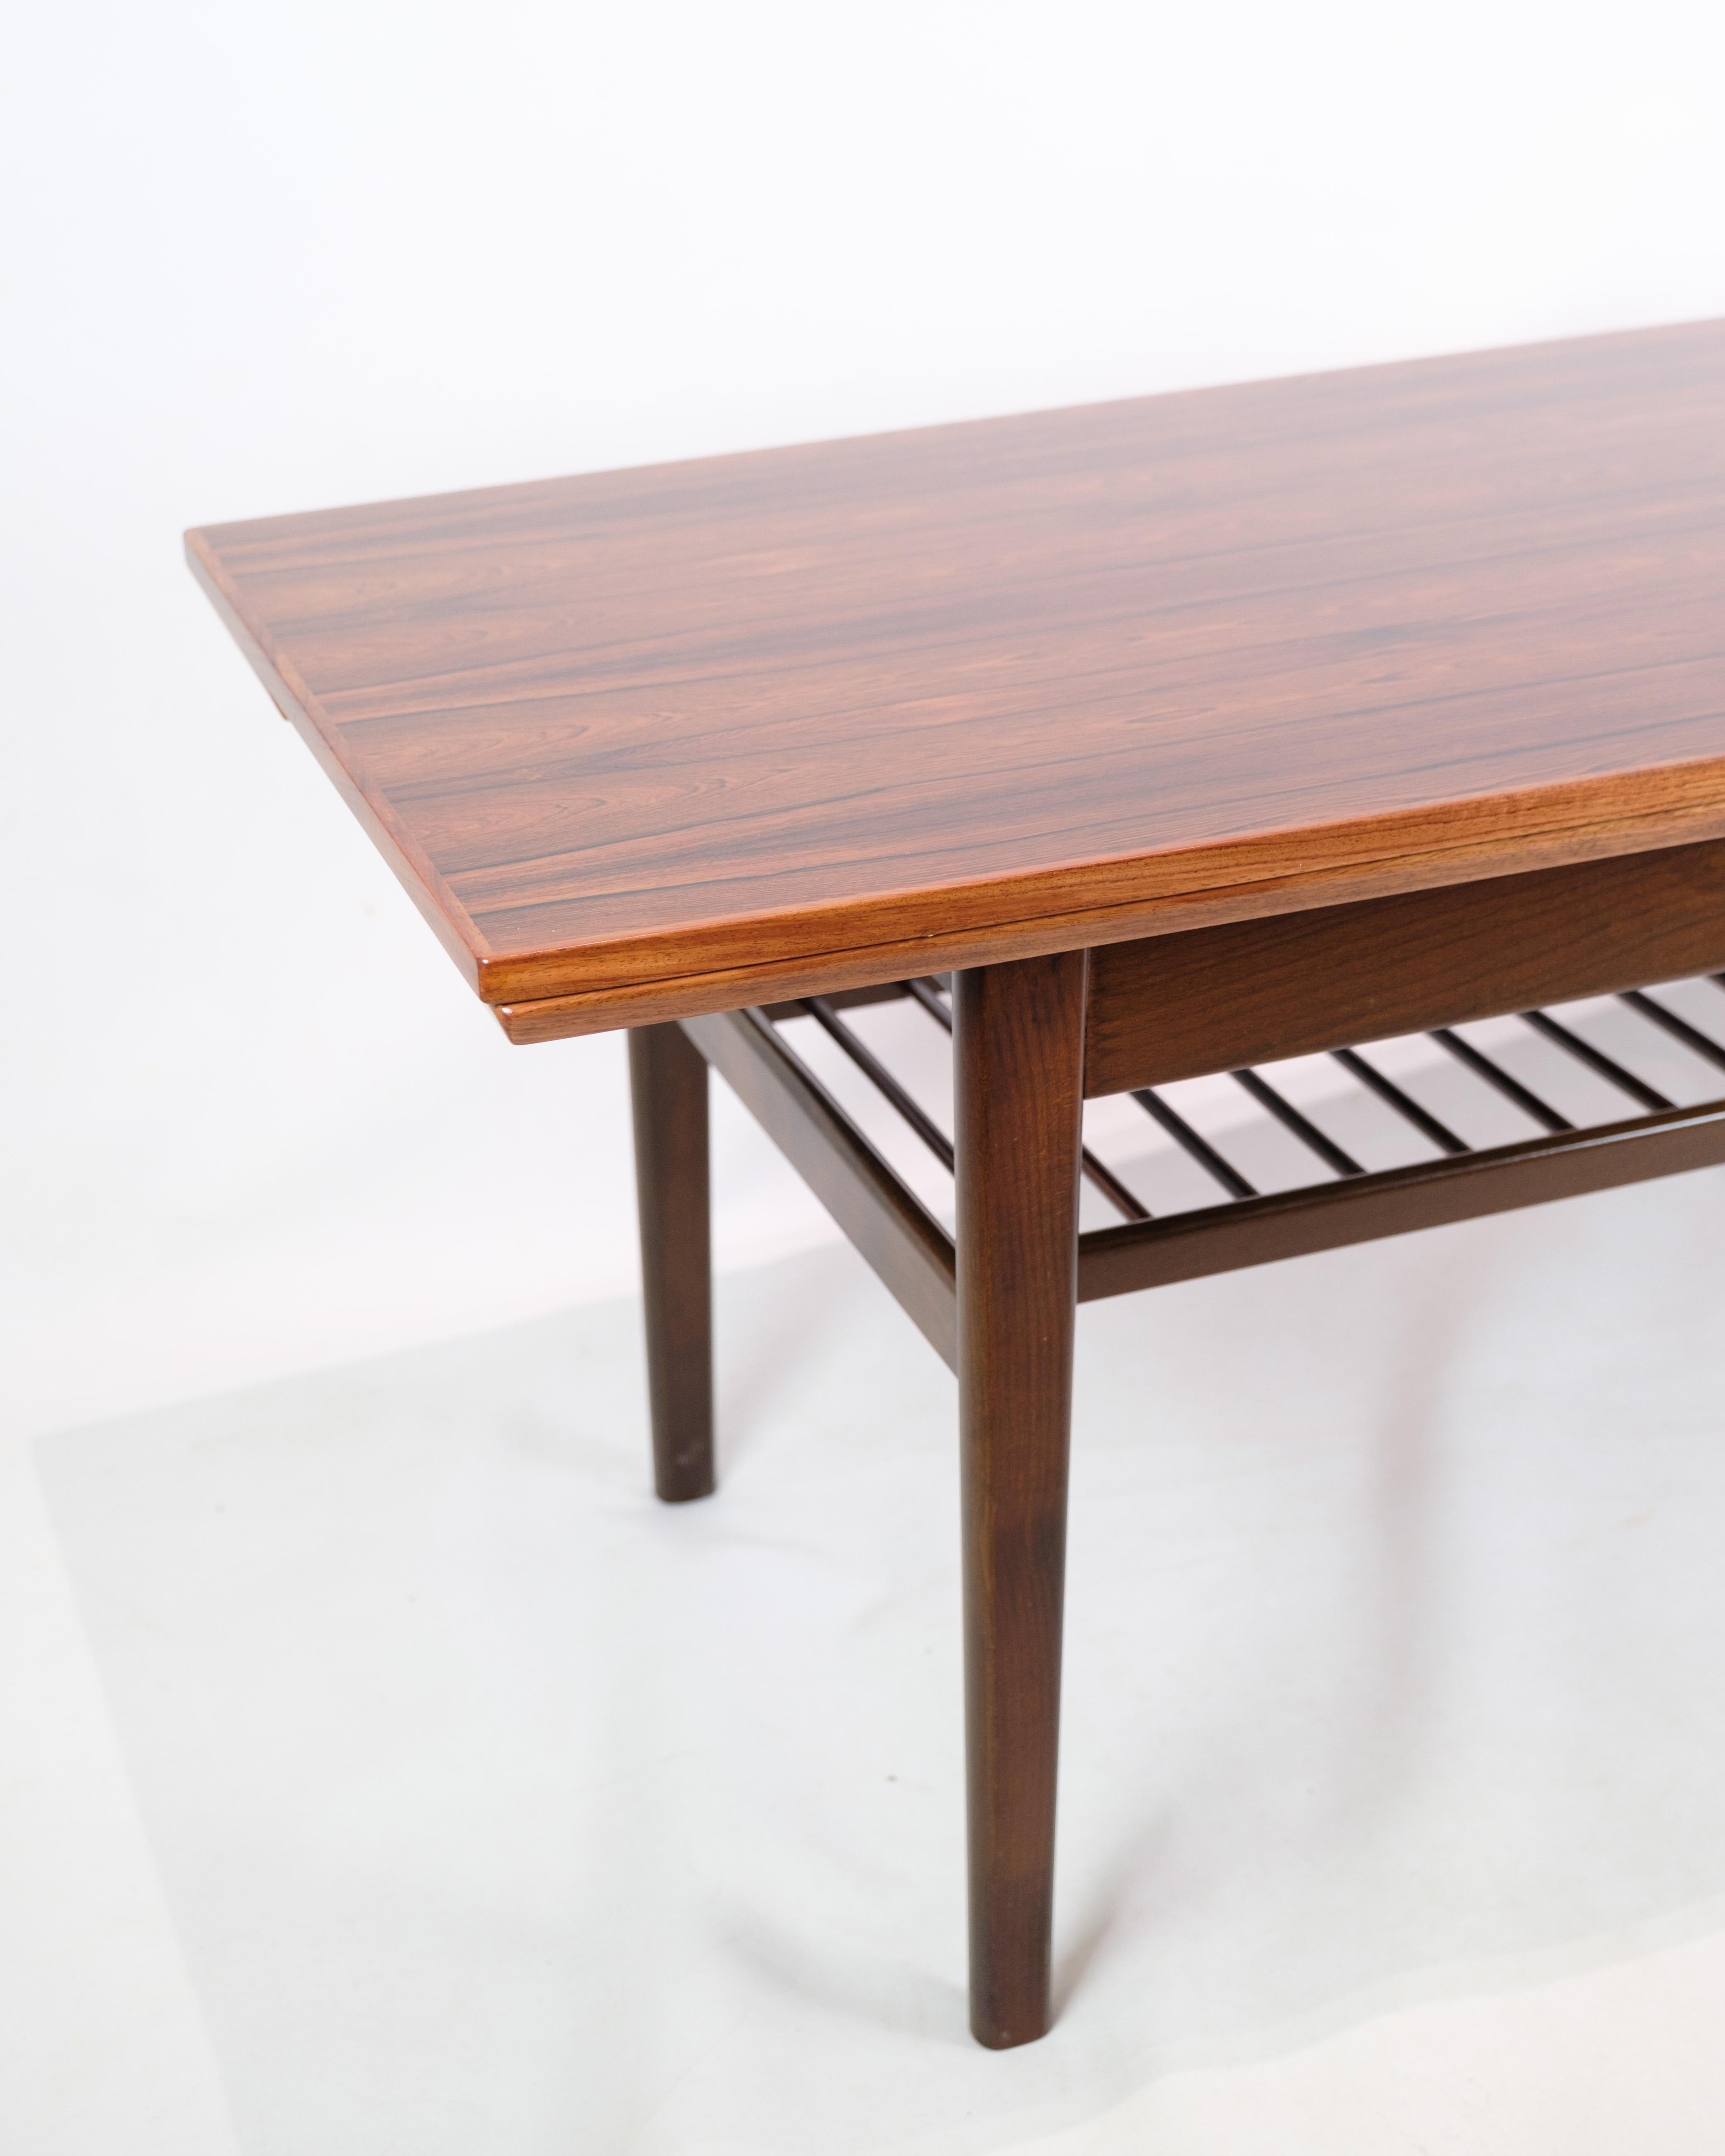 This coffee table is an impressive piece of furniture art that exudes both elegance and functionality. Made of rosewood and designed by the renowned Kai Kristiansen for Vildbjerg Møbelfabrik in 1960, it represents a high point in Danish furniture